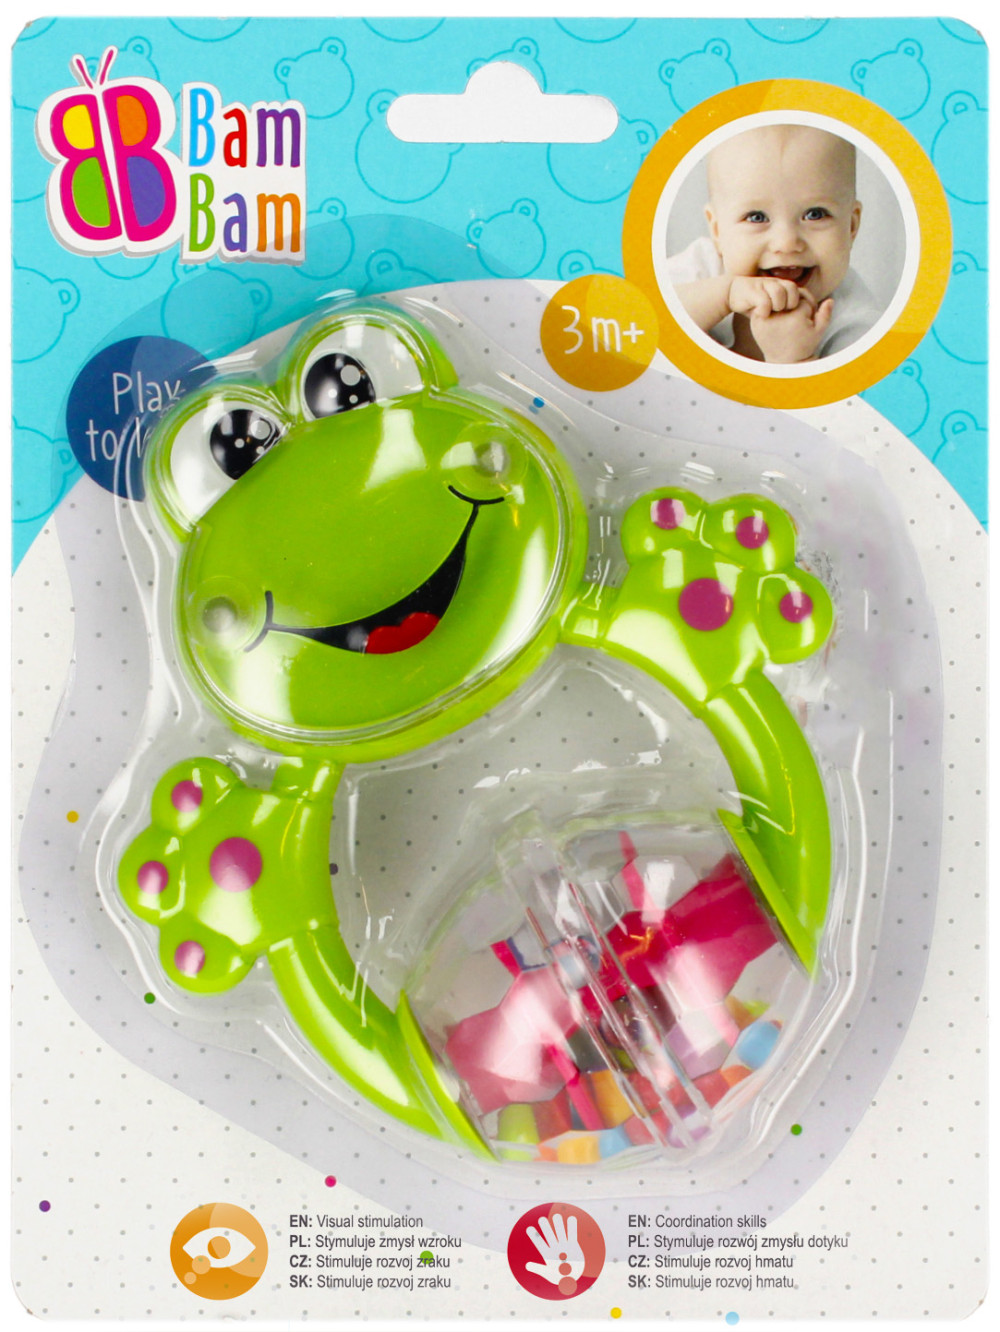 Toy frog rattle, Teething Ring